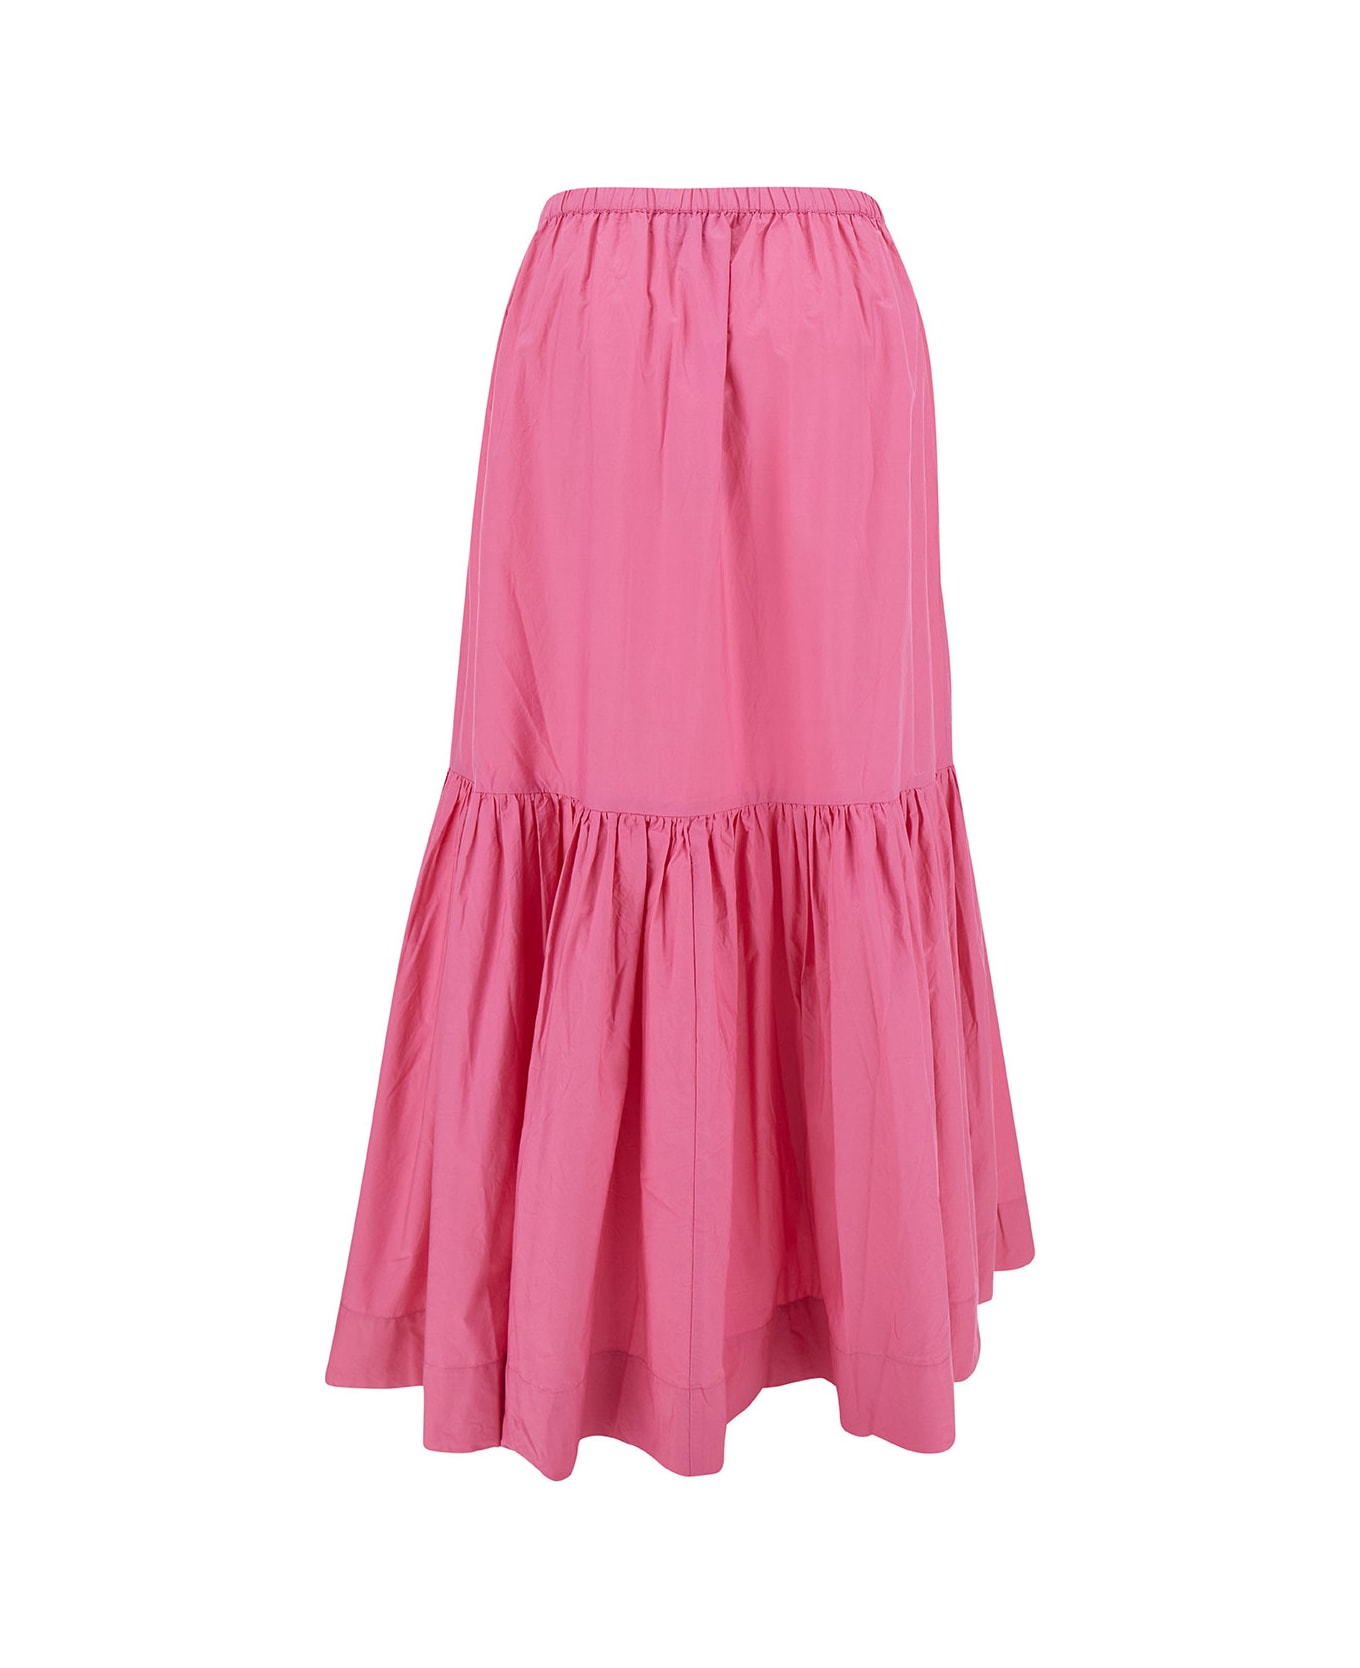 Ganni Long Pink Skirt With Flounce Detail In Cotton Woman - Pink